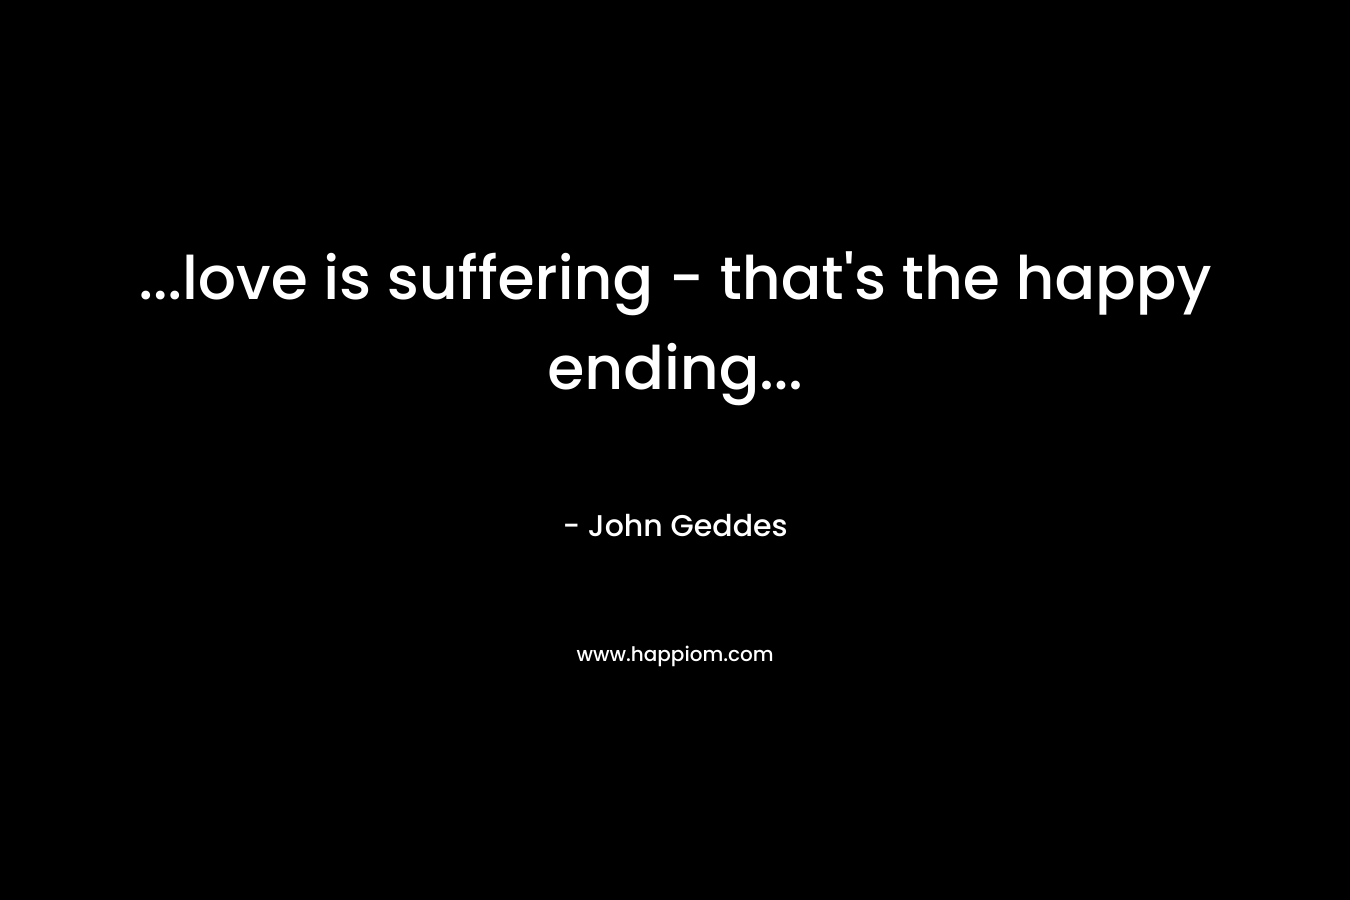 ...love is suffering - that's the happy ending...